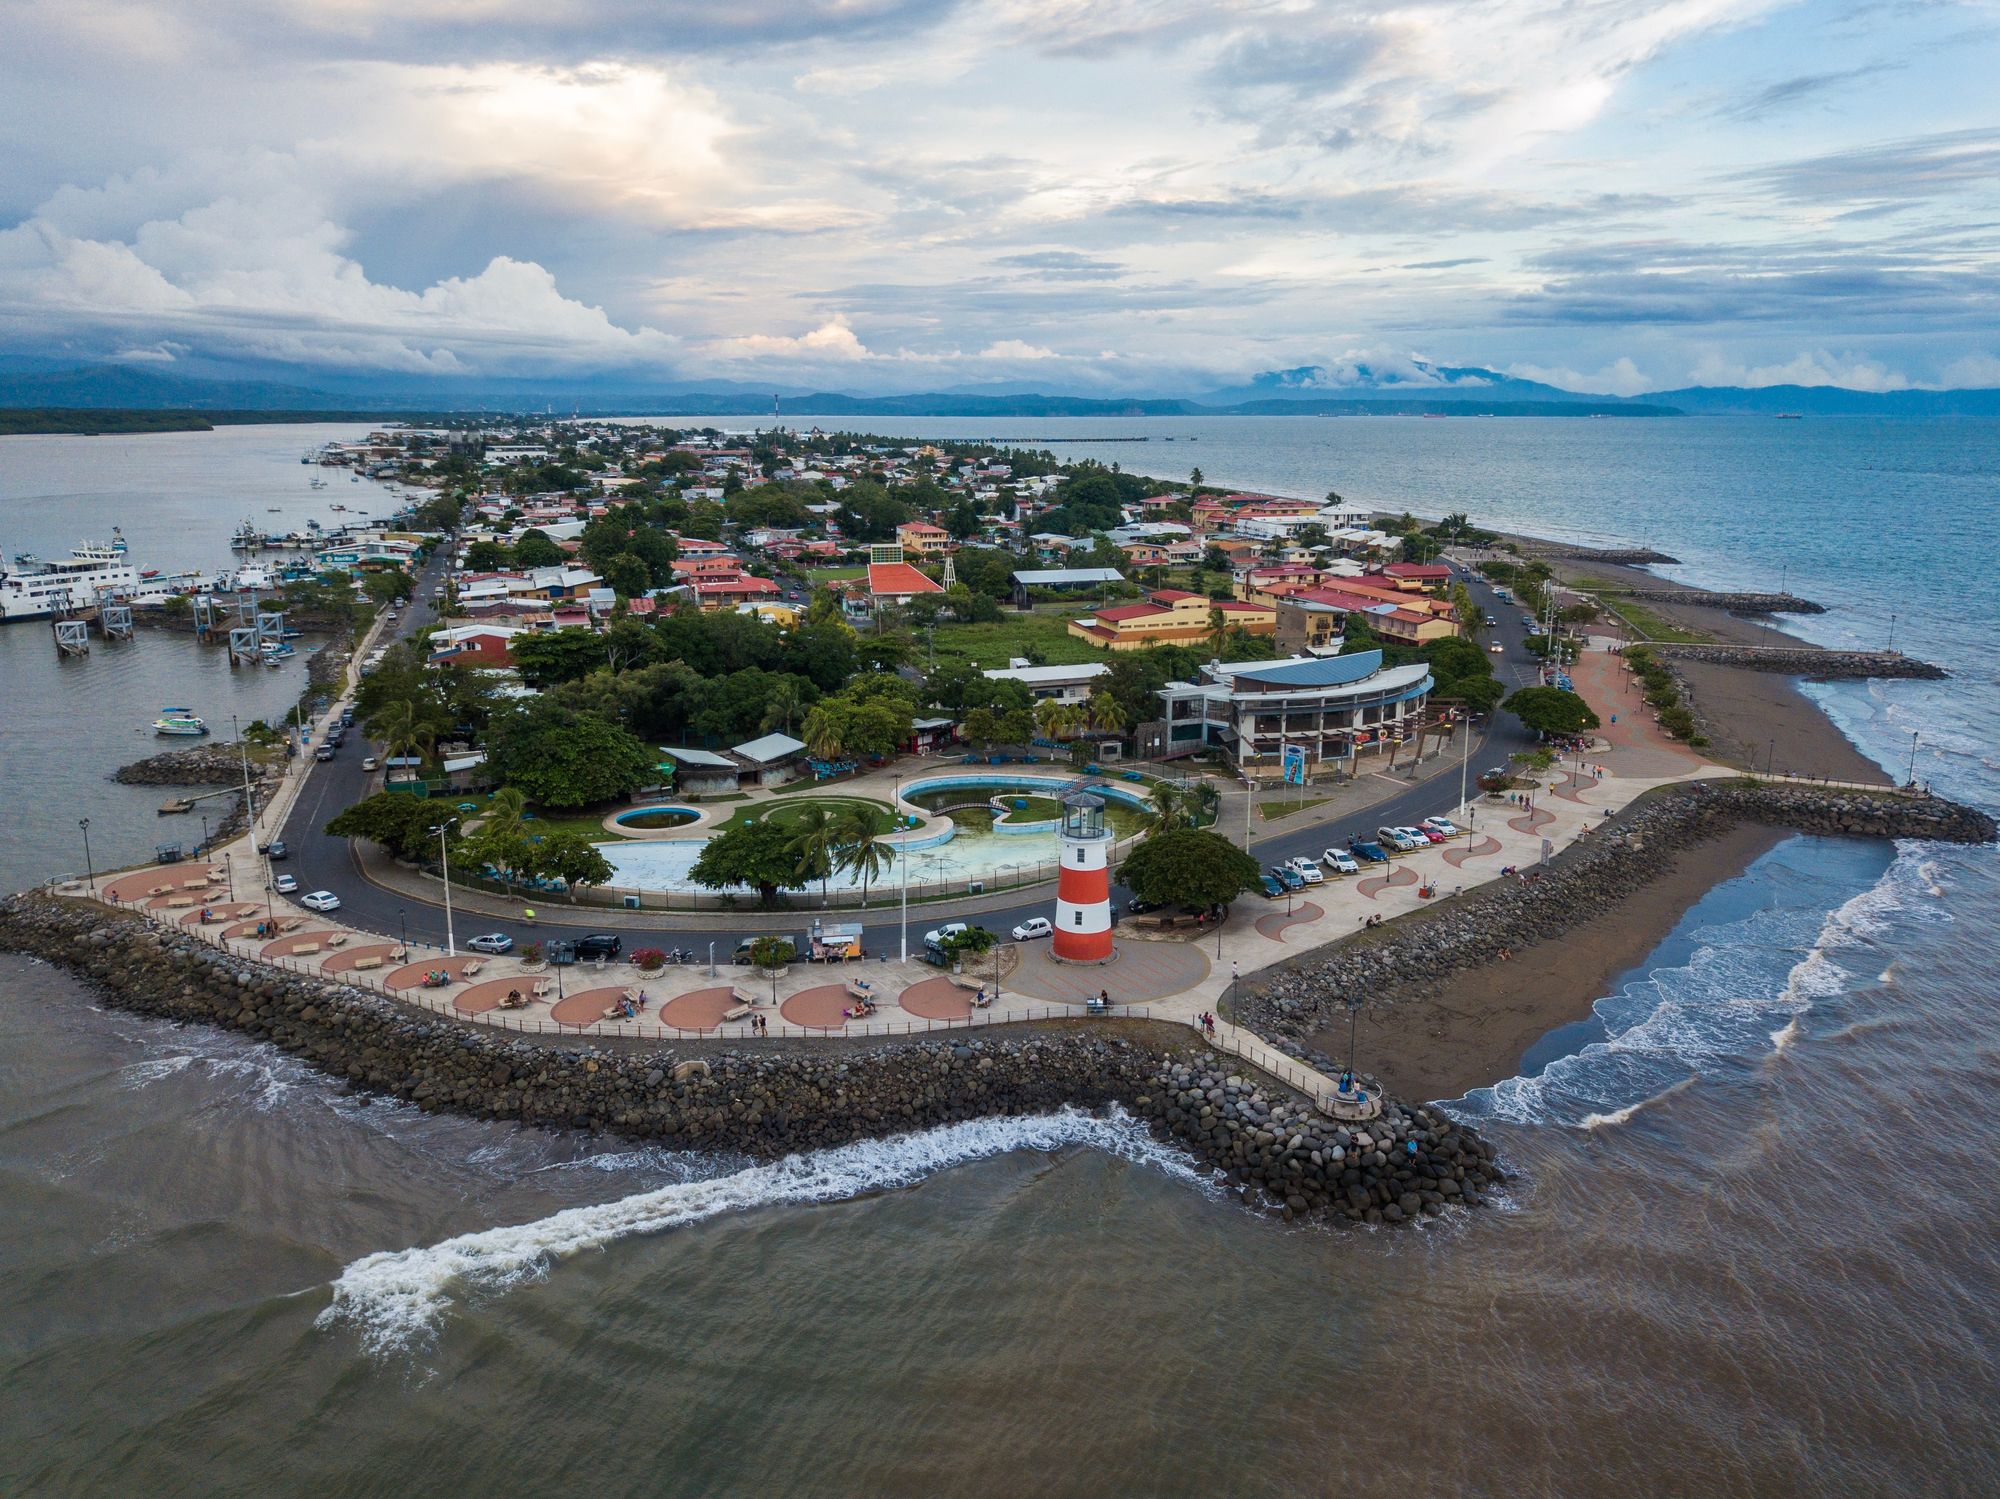 A photo of and Aerial view of Puntarenas, Costa Rica